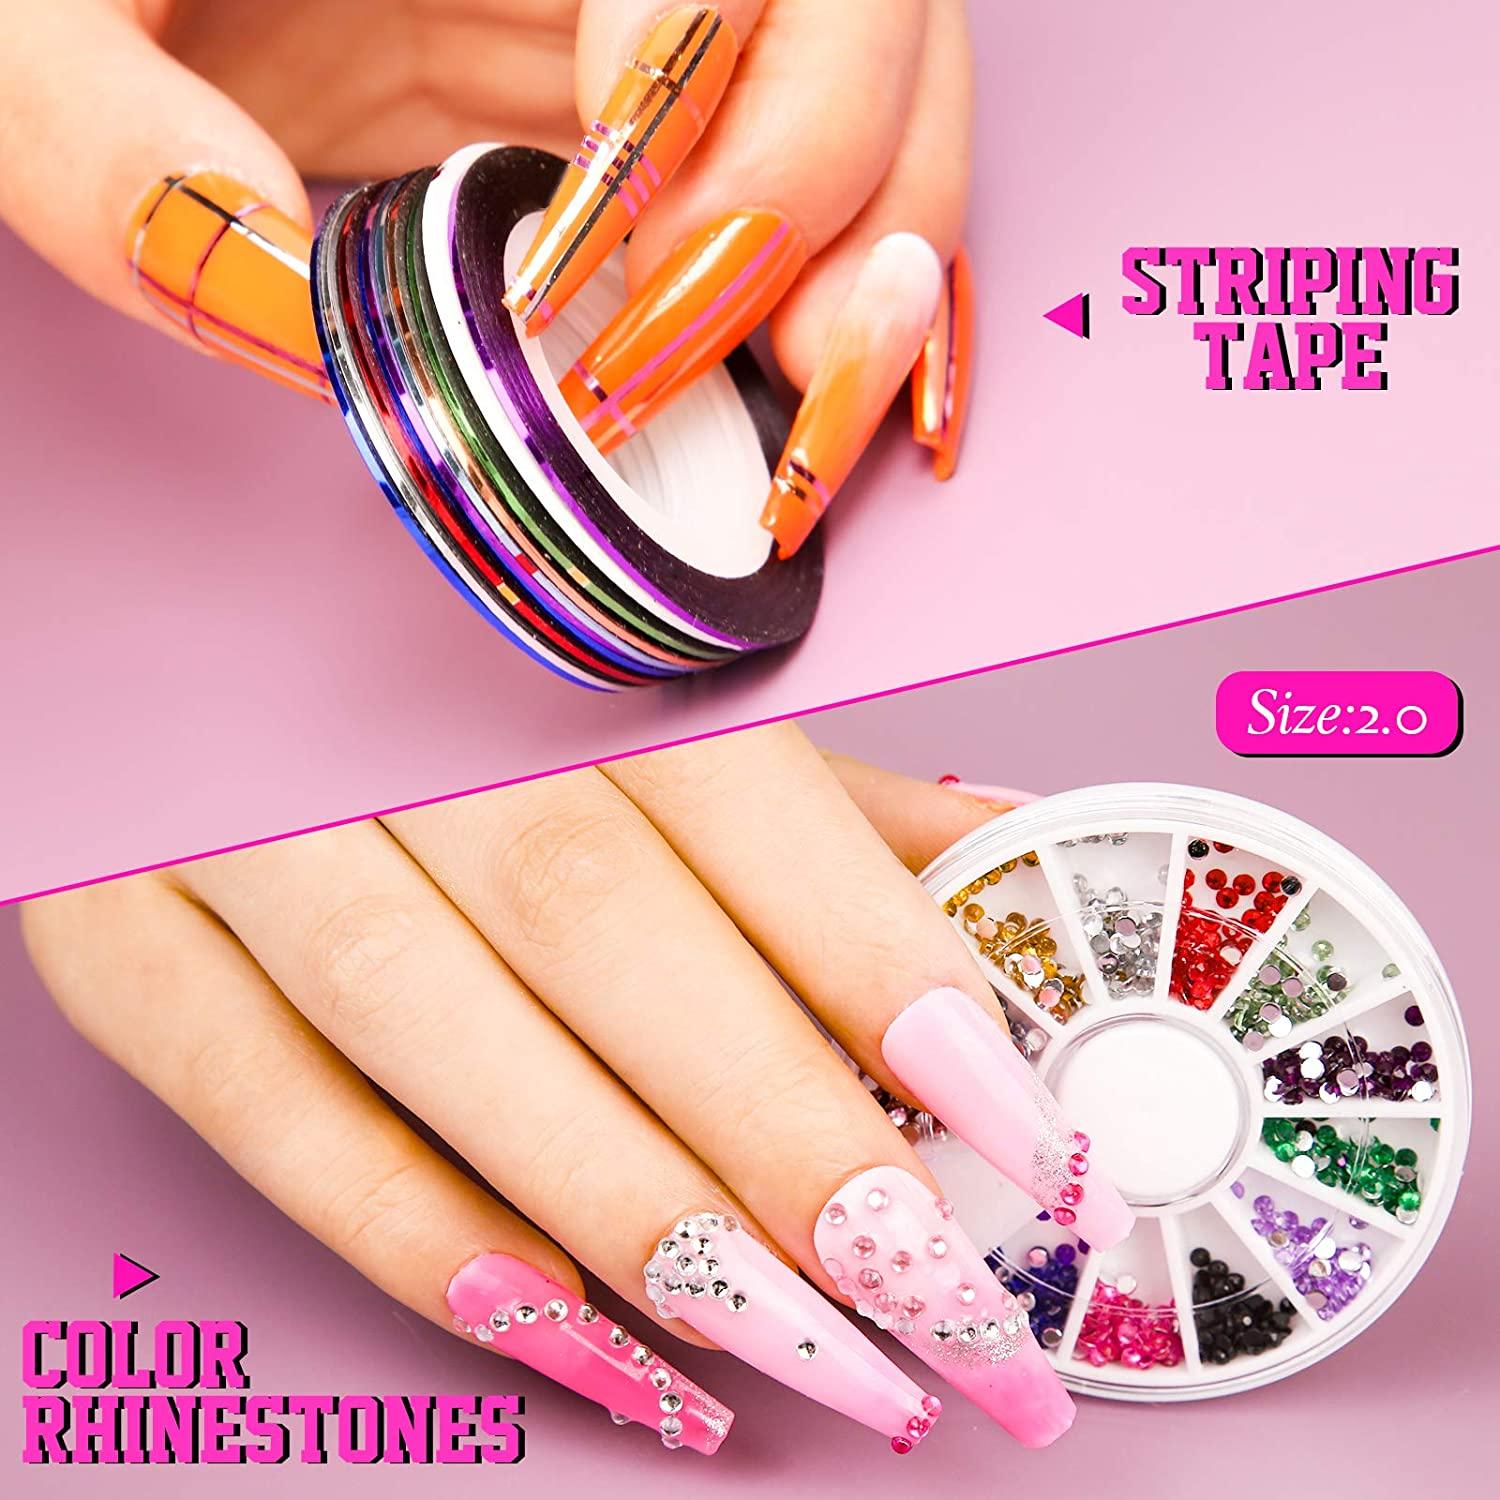 DOs & DON'Ts: striping tape nail art | how to use striping tape - YouTube